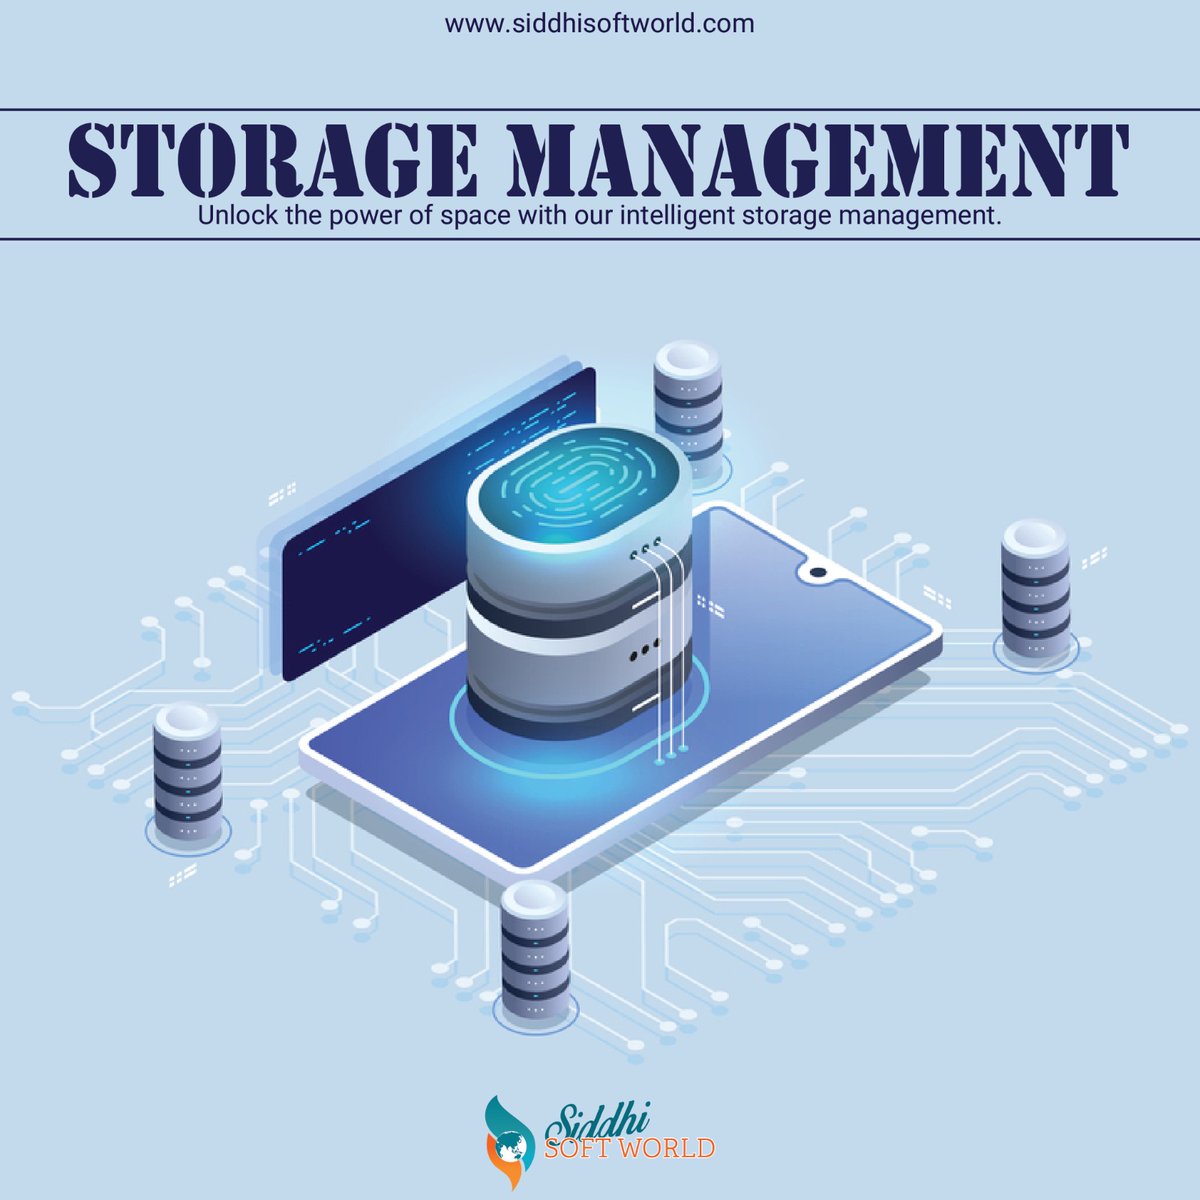 Monitoring the performance of storage systems and identifying and resolving performance bottlenecks.
.
.
#siddhisoftworld #powerogspace #storemanagement